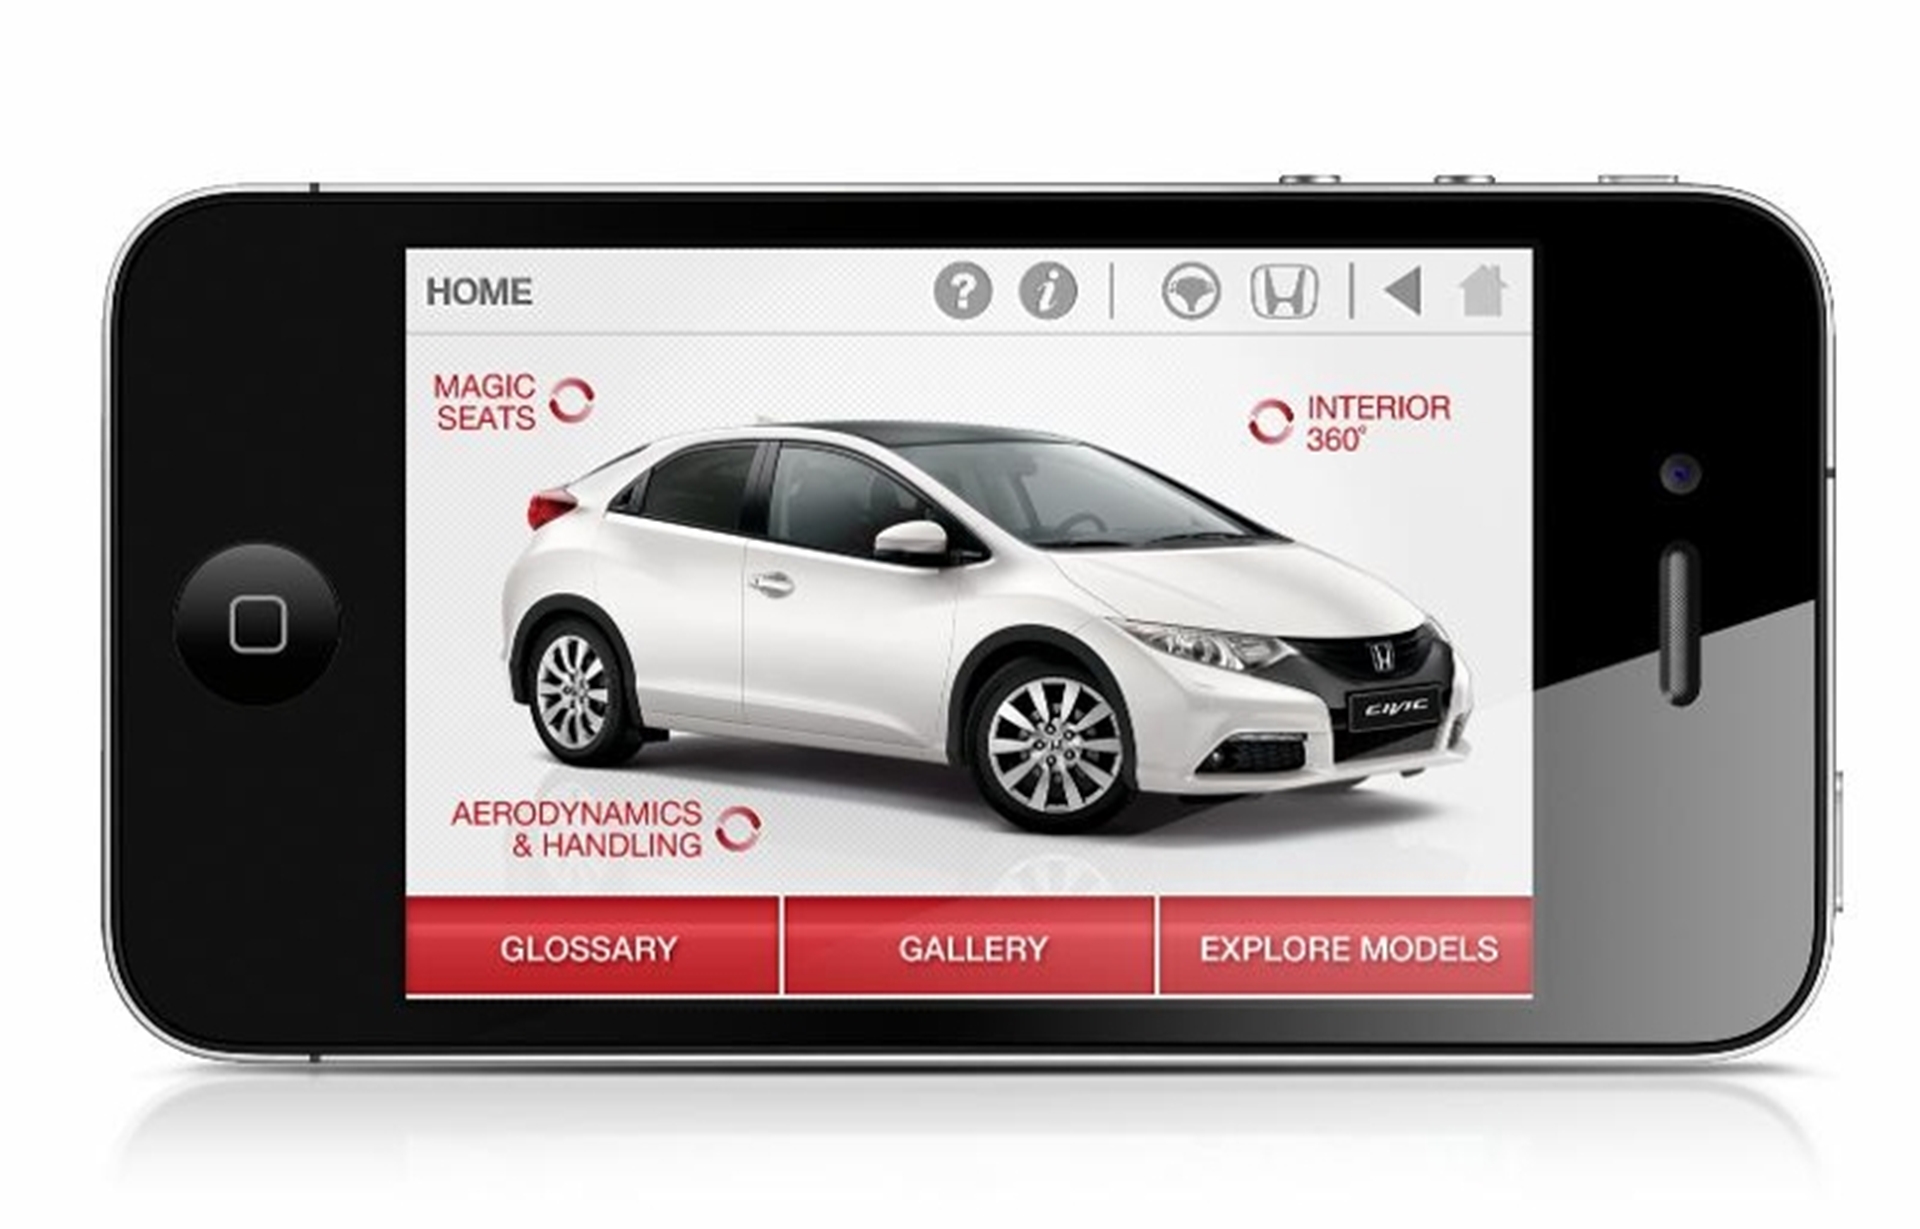 HONDA BRINGS TOGETHER EMOTION AND RATIONALITY WITH NEW CIVIC APP